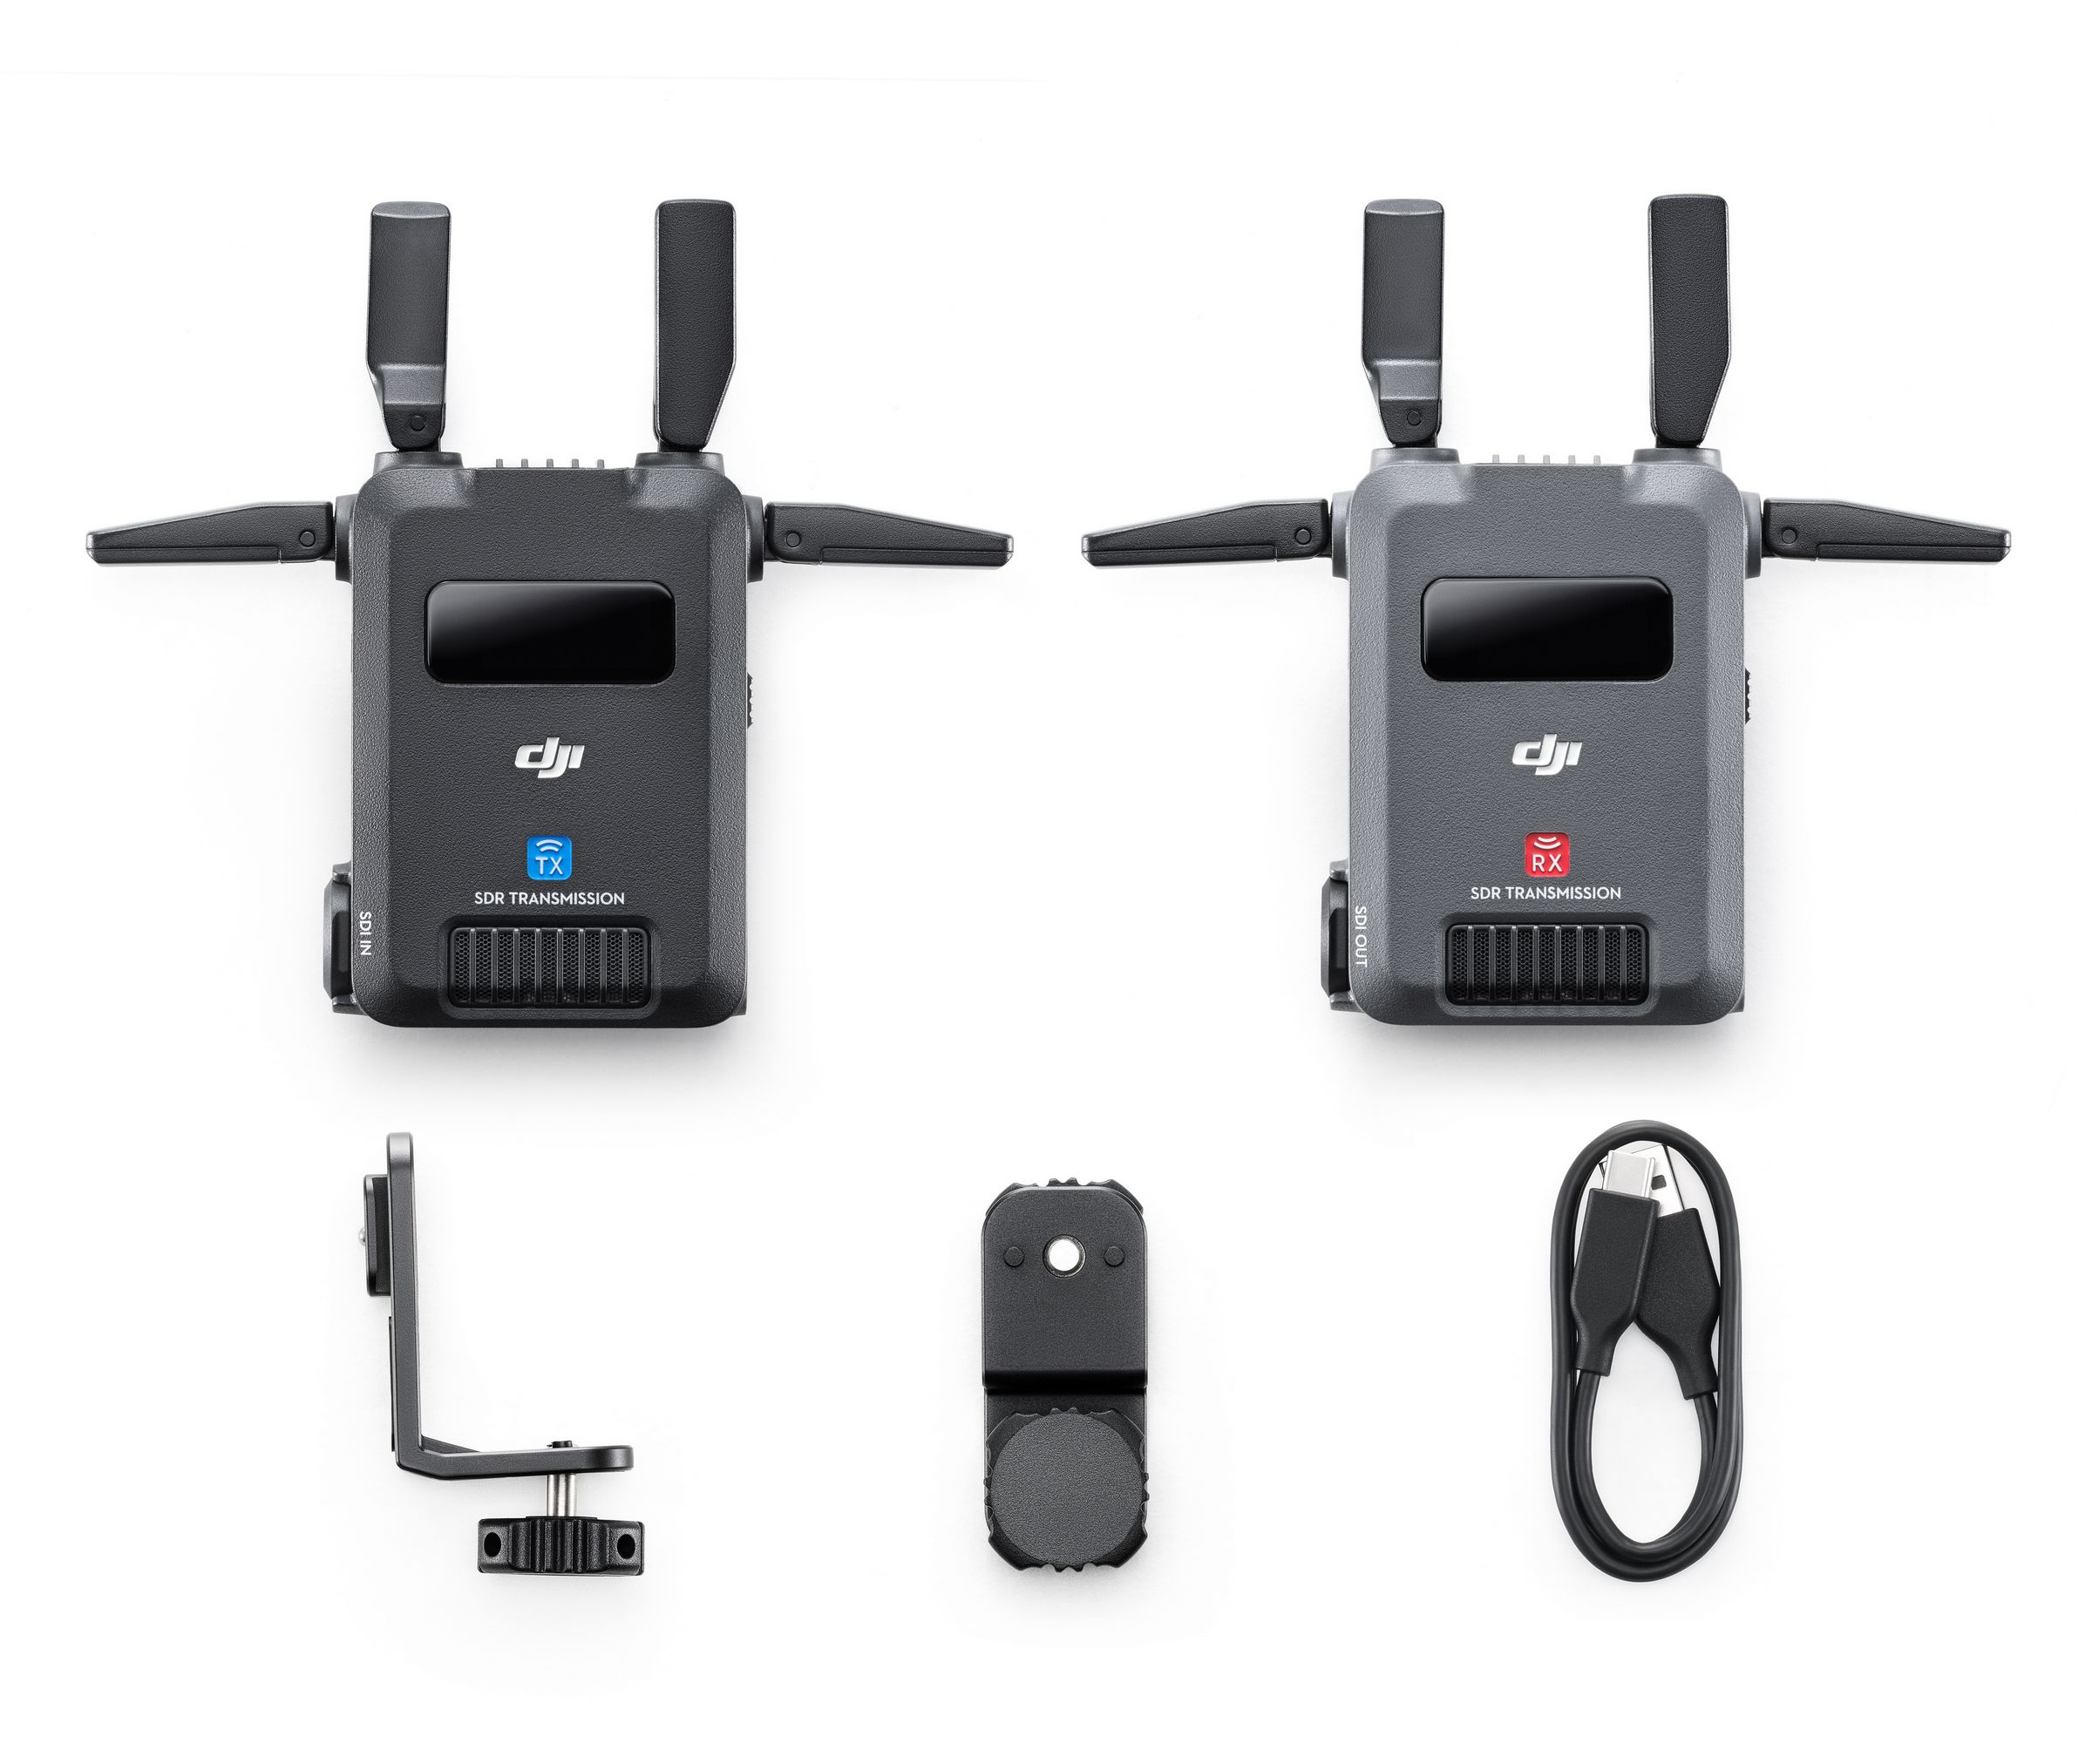 DJI's latest gadget lets you control cameras and view video remotely